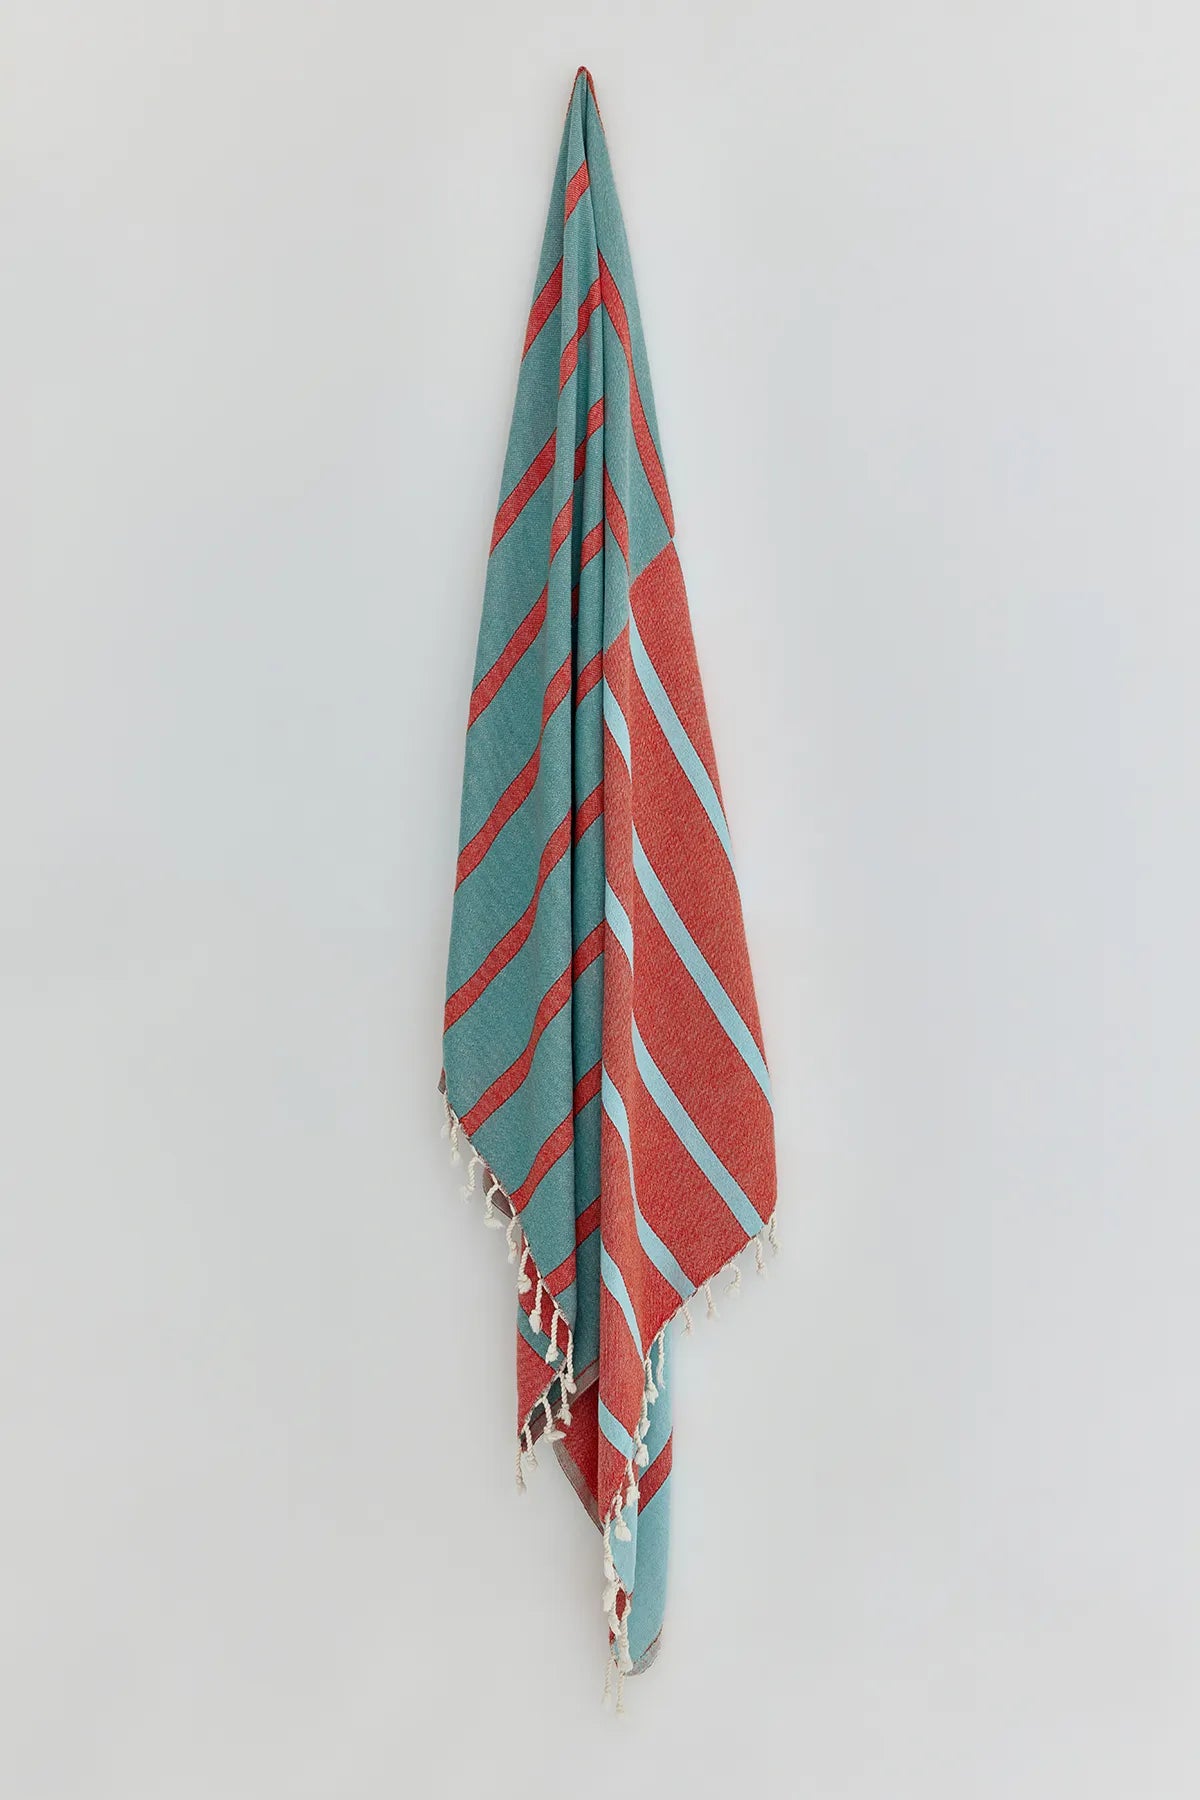 Beach/Bath,Sage-Terra,Turkish towel,hanged,summer,line patterned,double-faces,purified sand,light,compact, easy pack,fun, recycled,double color